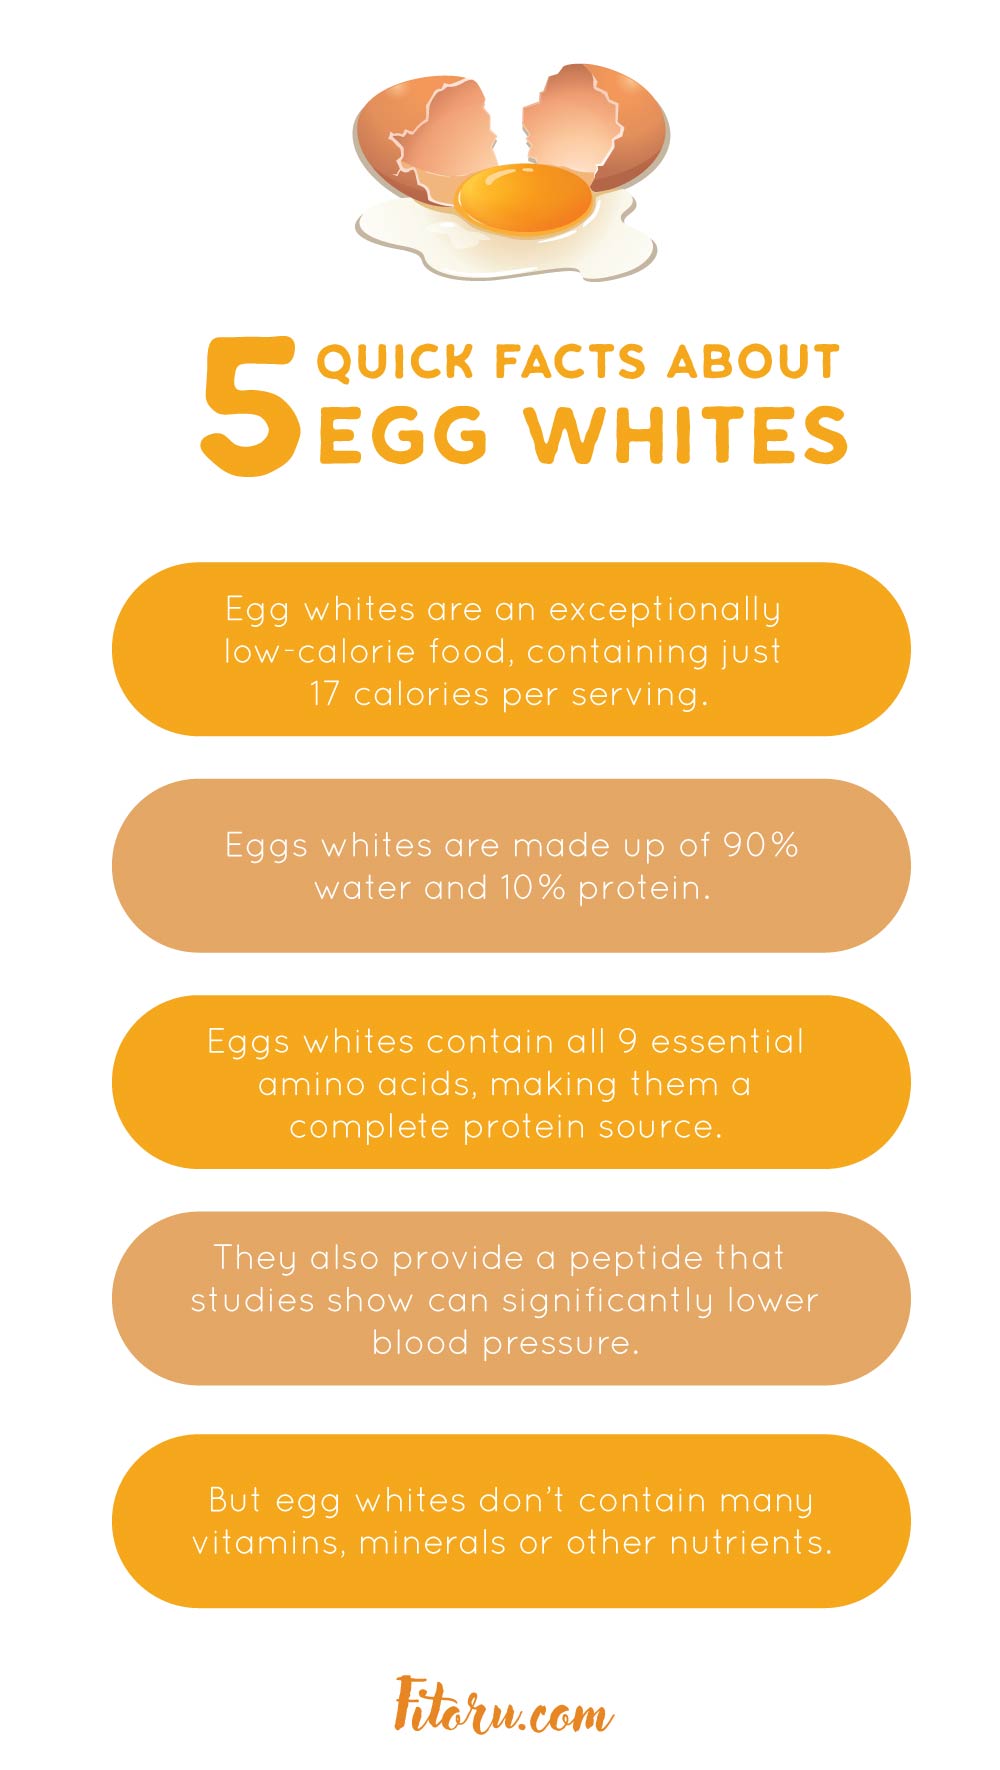 5 Quick Facts About Egg Whites